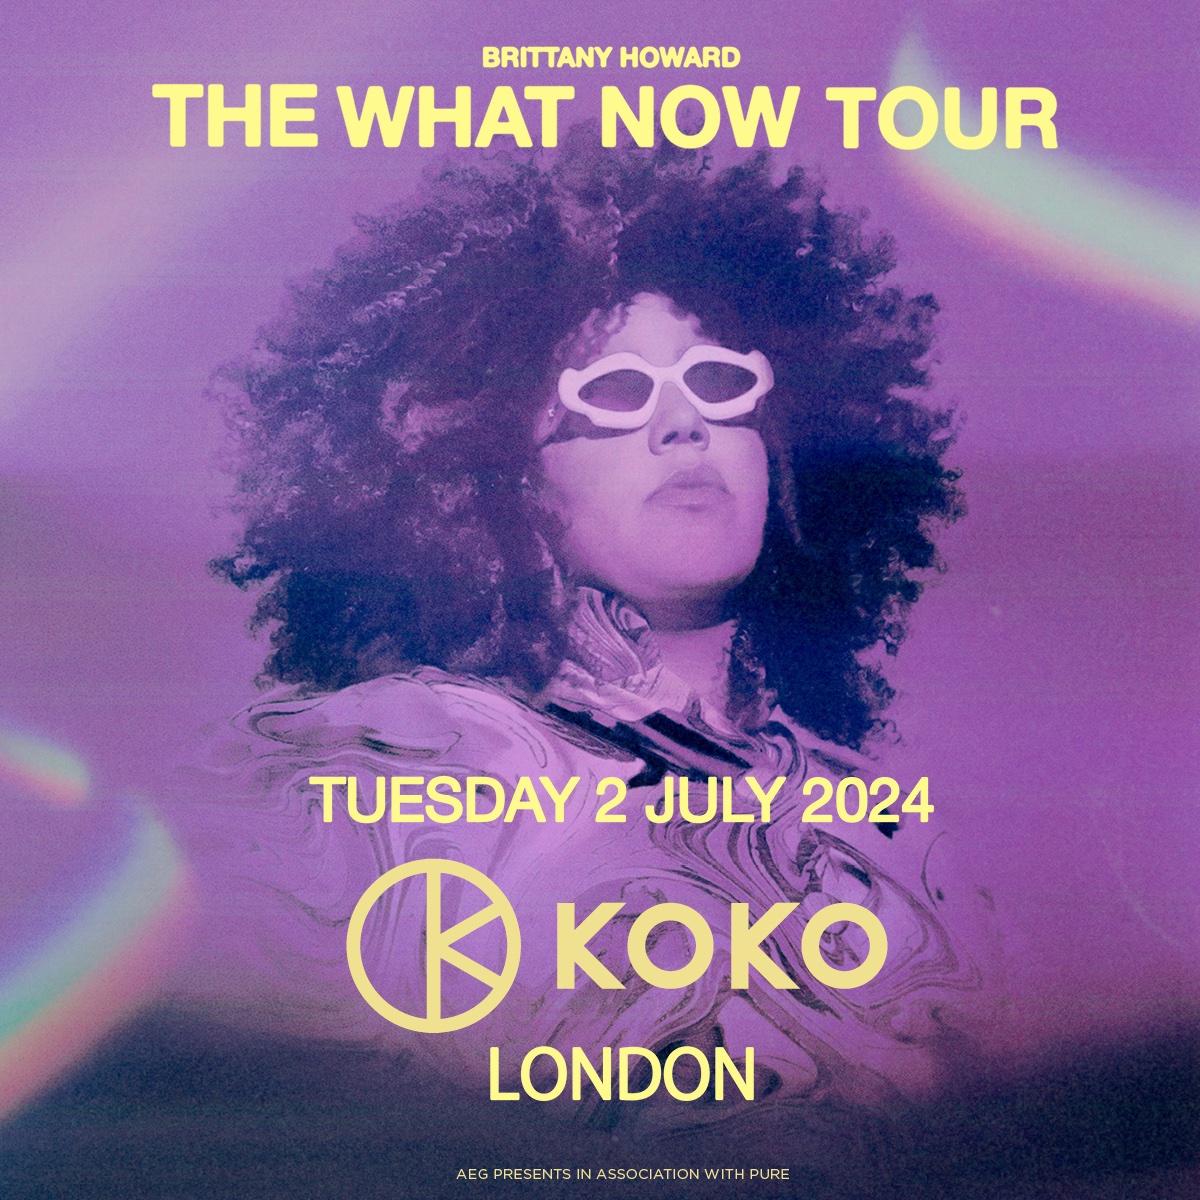 ON SALE NOW: @Alabama_Shakes 's @blkfootwhtfoot comes to #KOKO on July 2nd, 2024! Secure your ticket here: news.koko.co.uk/brittanyhoward #BrittanyHoward #KOKOLondon #TheWhatNowTour